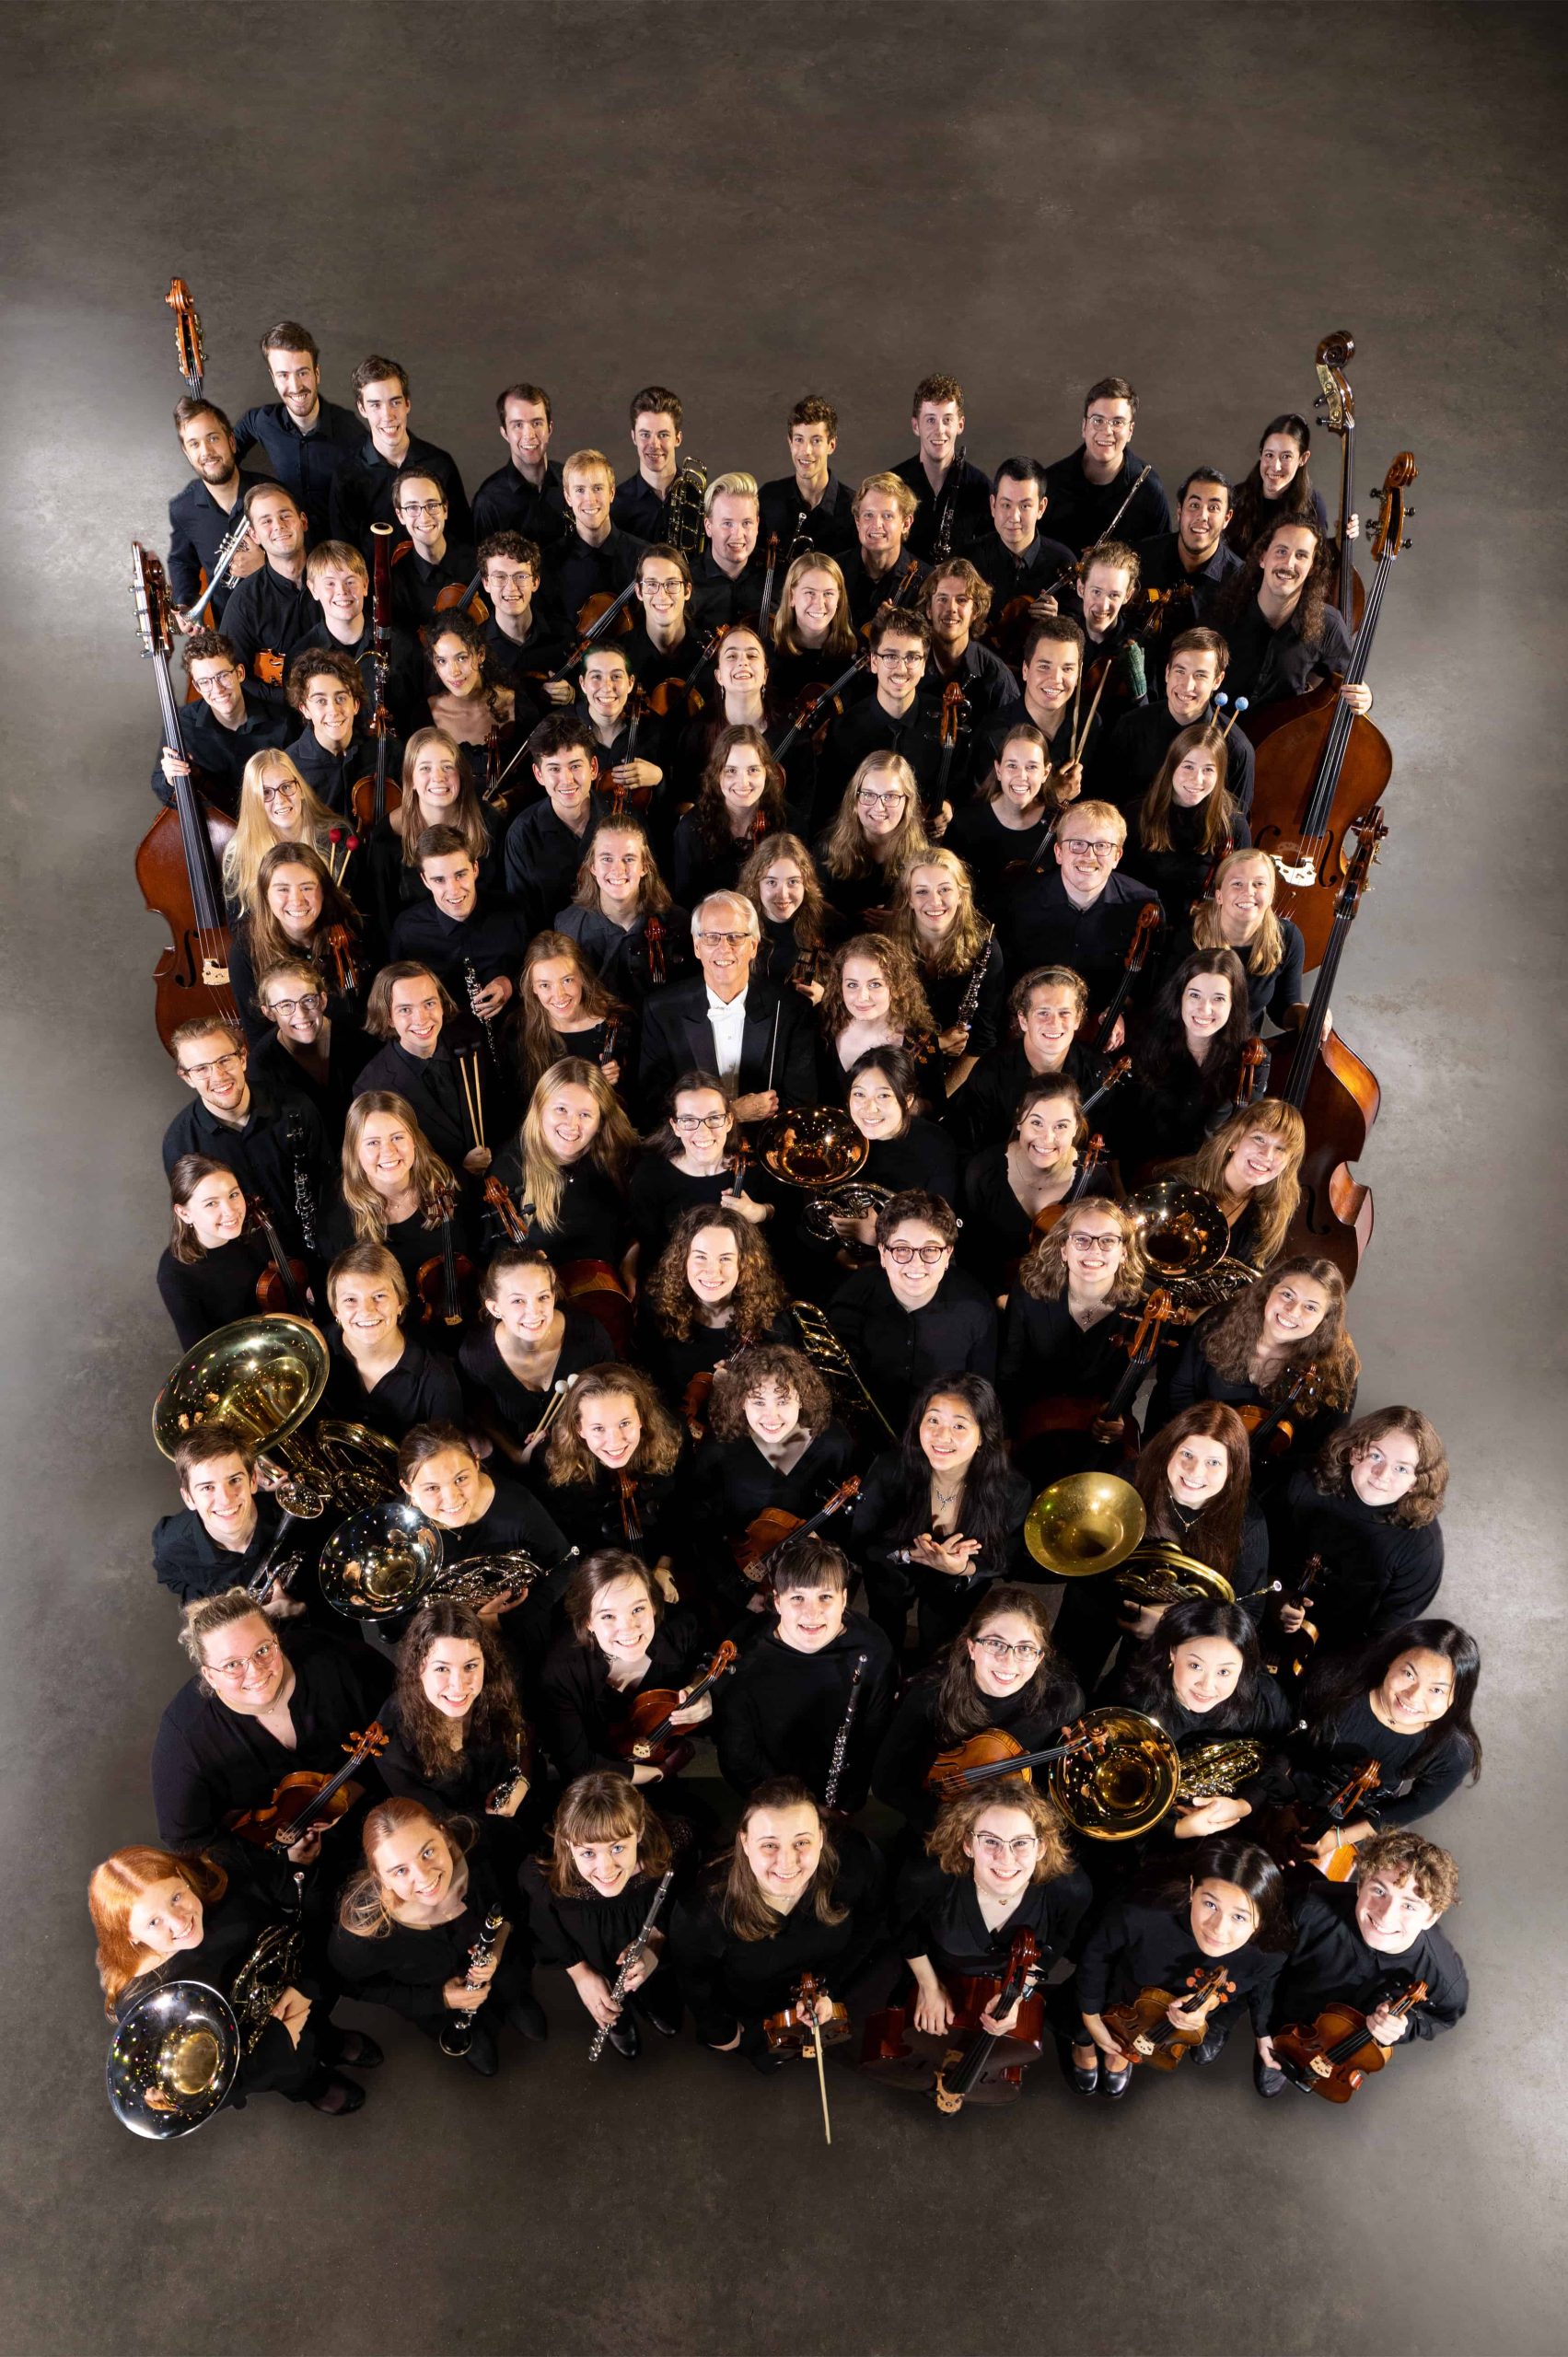 View from above: Members of an orchestra gathered together, looking up, smiling